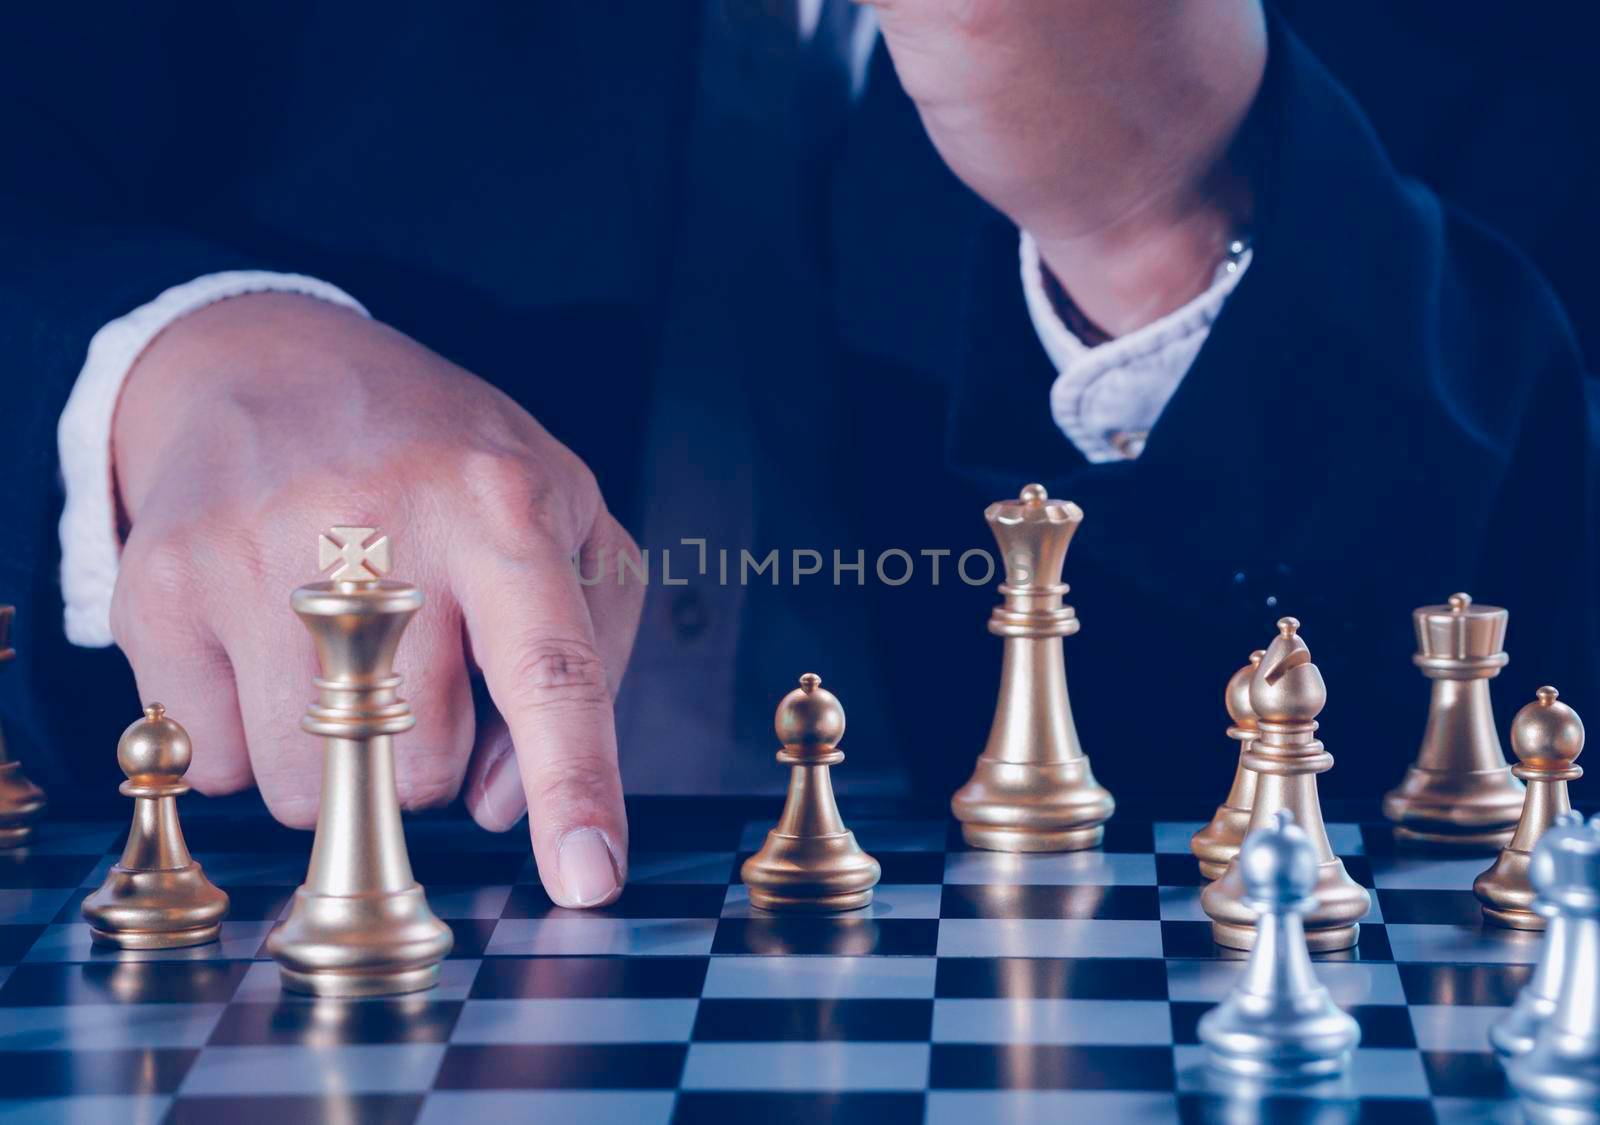 Hand of businessman holding gold king chess on stock market or forex trading graph chart with cityscape image economy trend for digital financial investment.Management or leadership strategy concept.